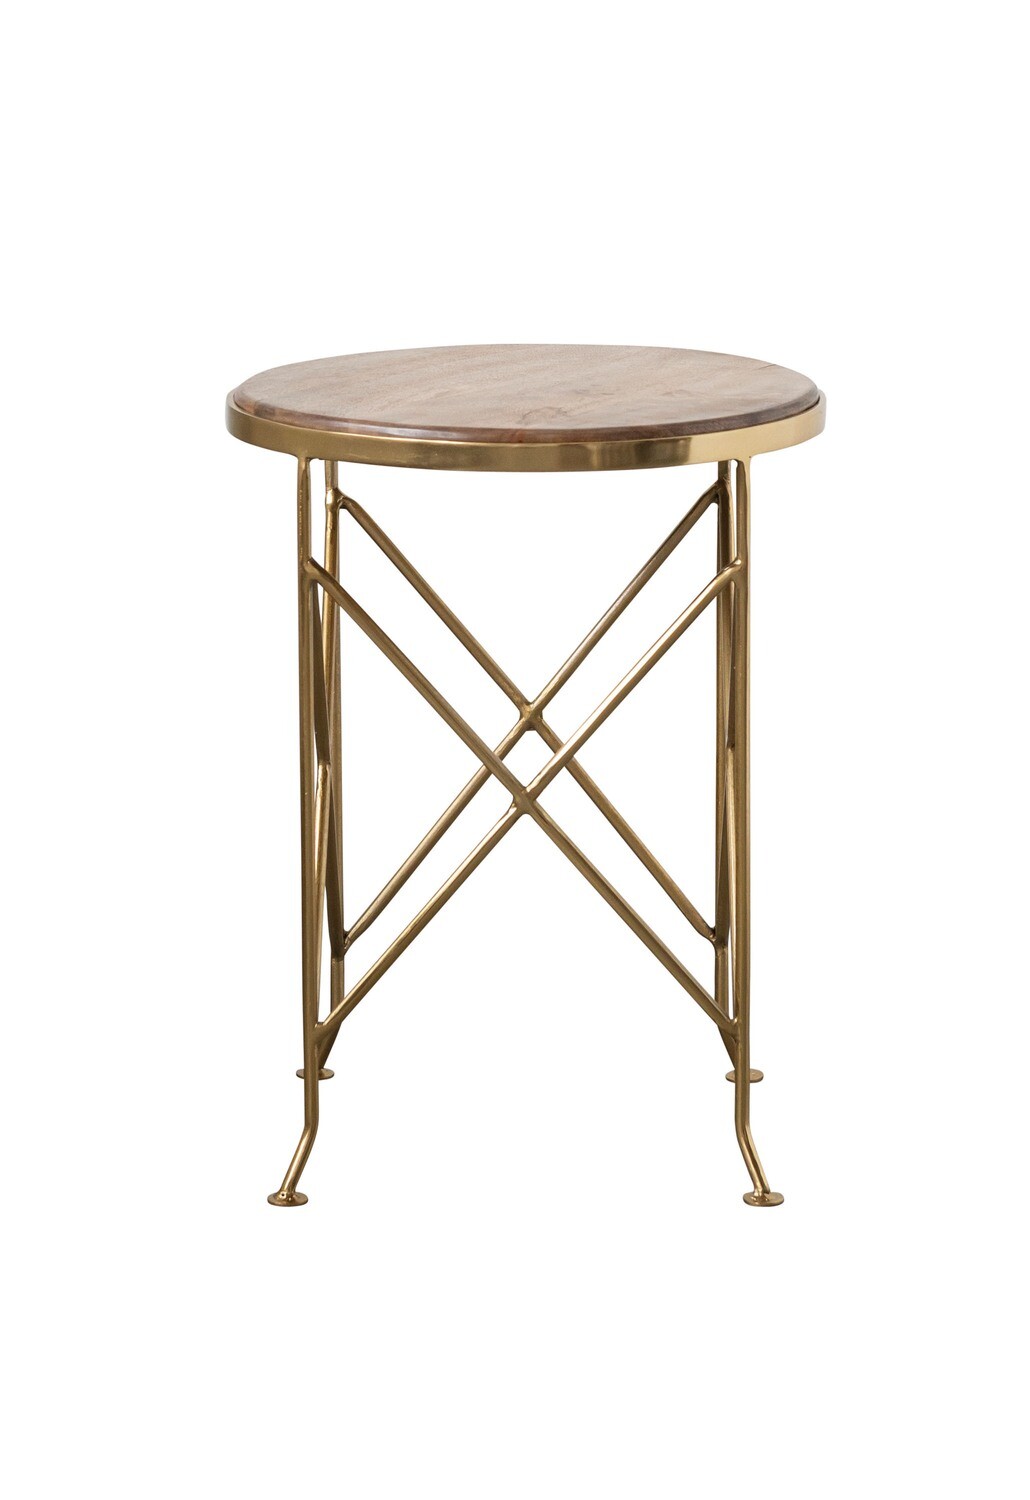 Brown Mango Wood Side Table with Gold Metal Legs